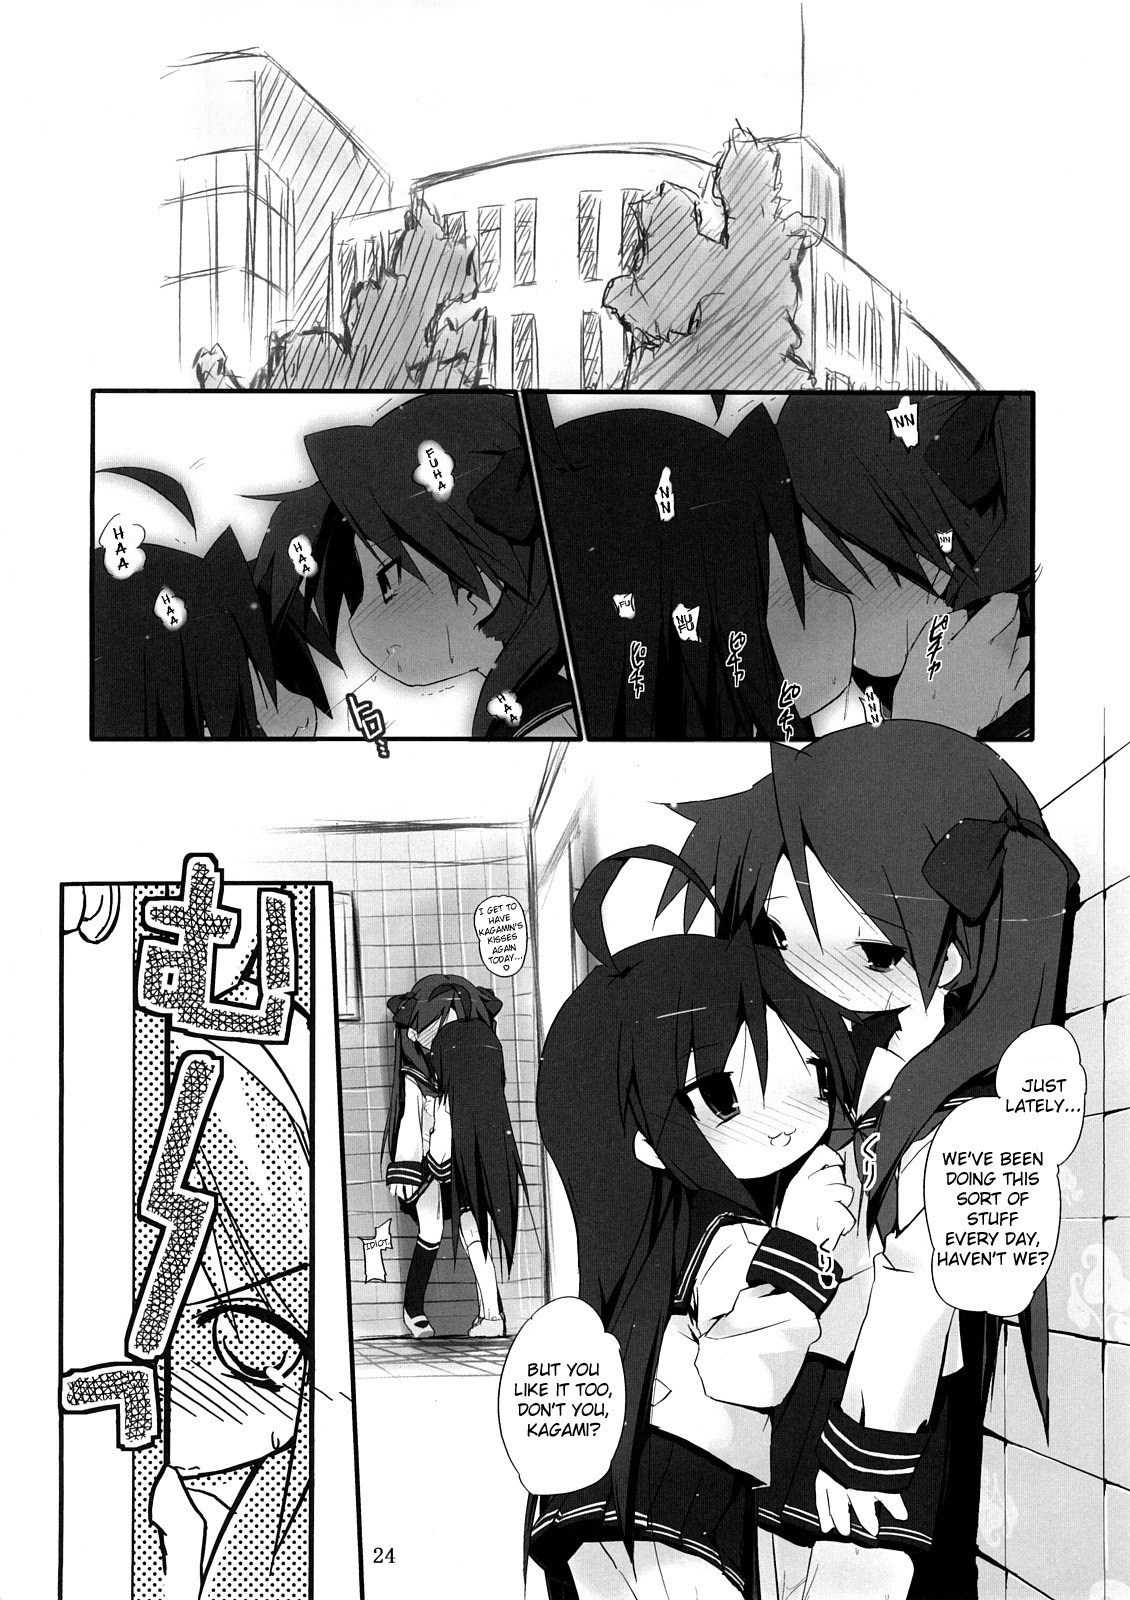 Happy New Year 's Eve disappointed hentai manga picture 24